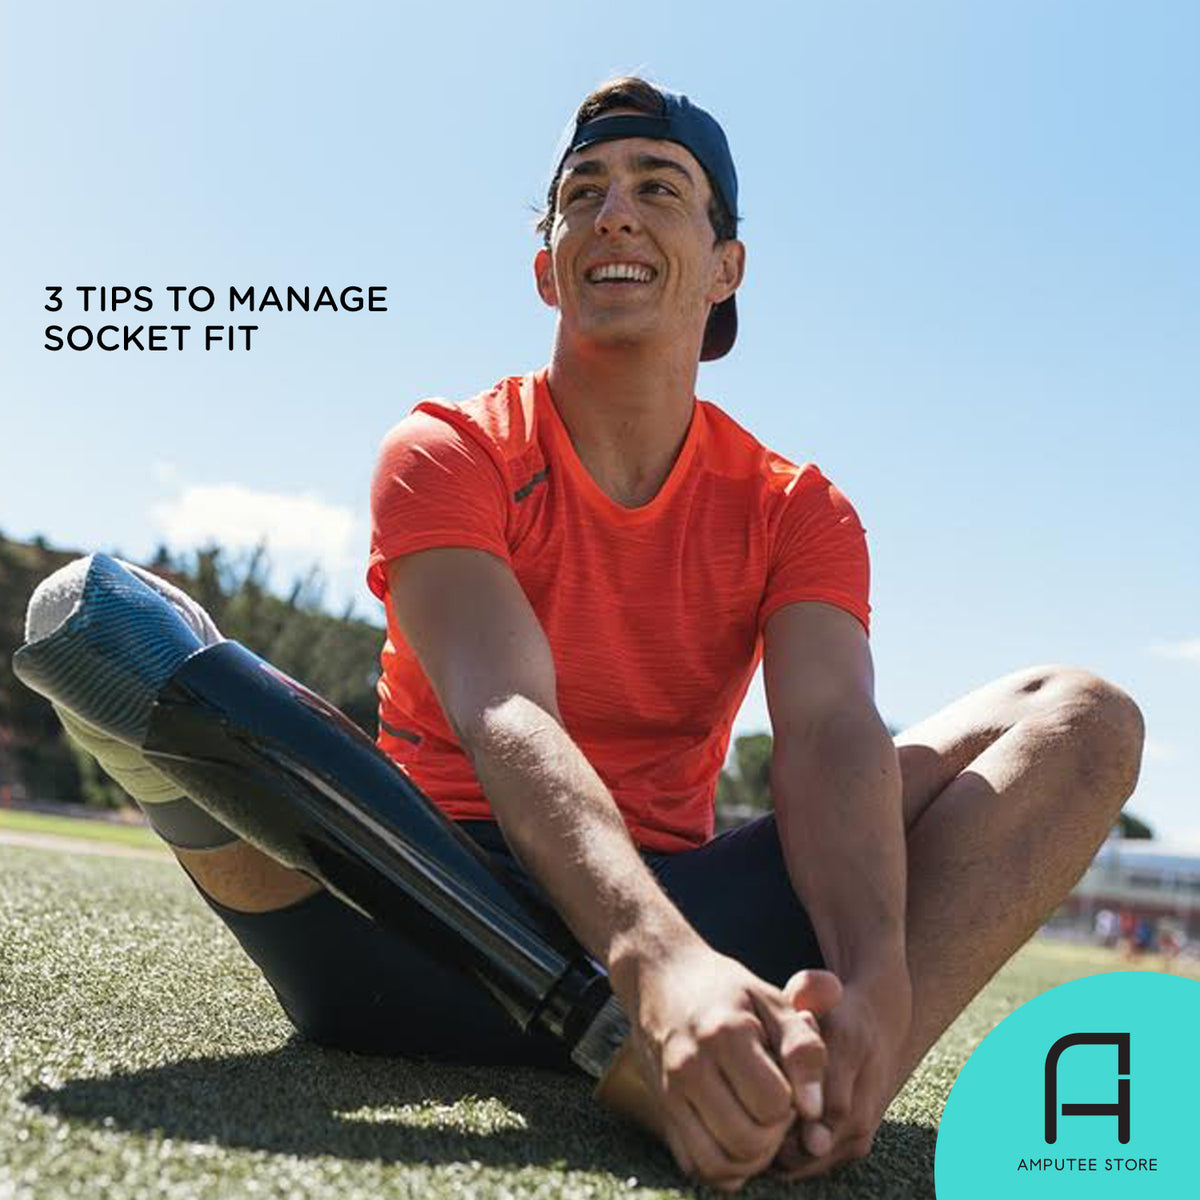 3 Tips to Manage Prosthetic Socket Fit